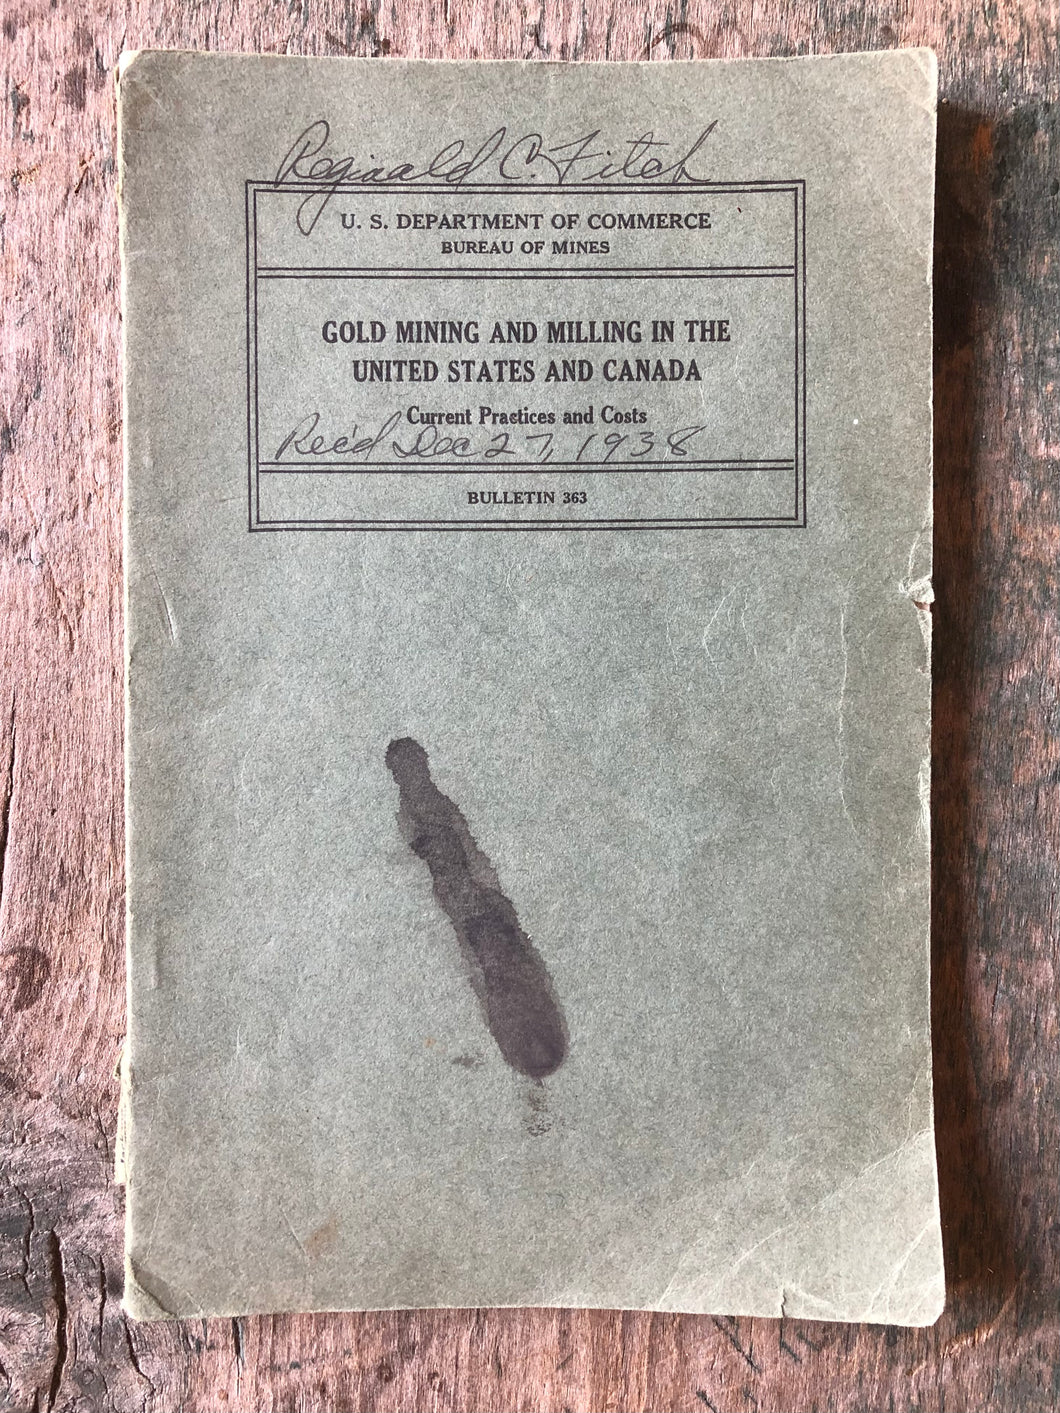 Gold Mining and Milling in the United States and Canada: Current Practices and Costs by Charles F. Jackson and John B. Knaebel. U.S Department of Commerce, Bureau of Mines Bulletin 363